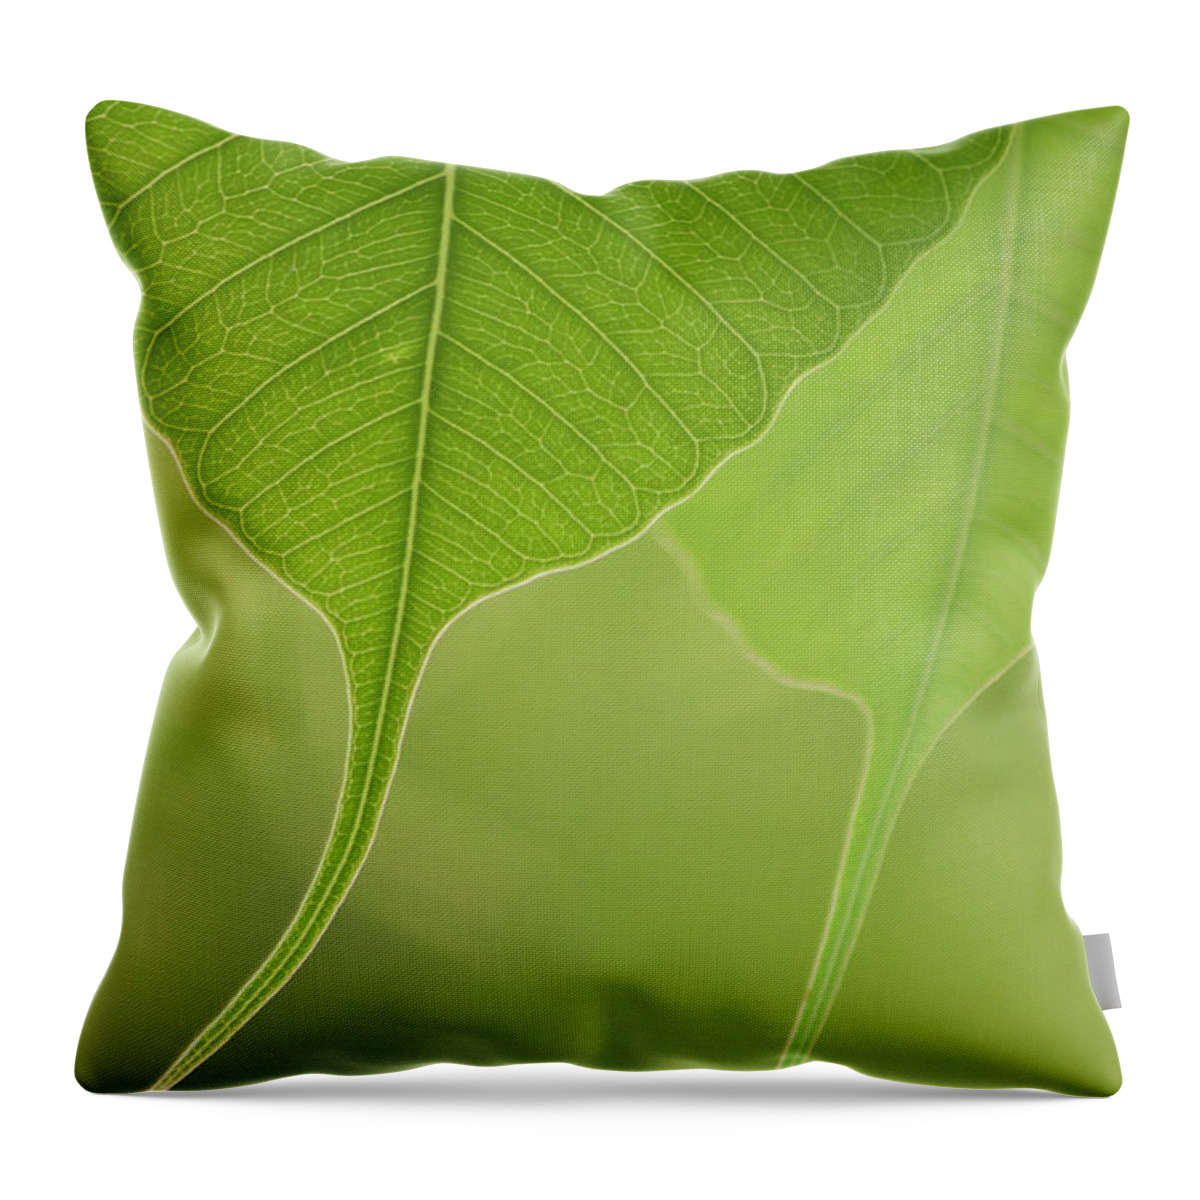 Outdoors Throw Pillow featuring the photograph Close Up Of Peepal Leaves by Rahul De